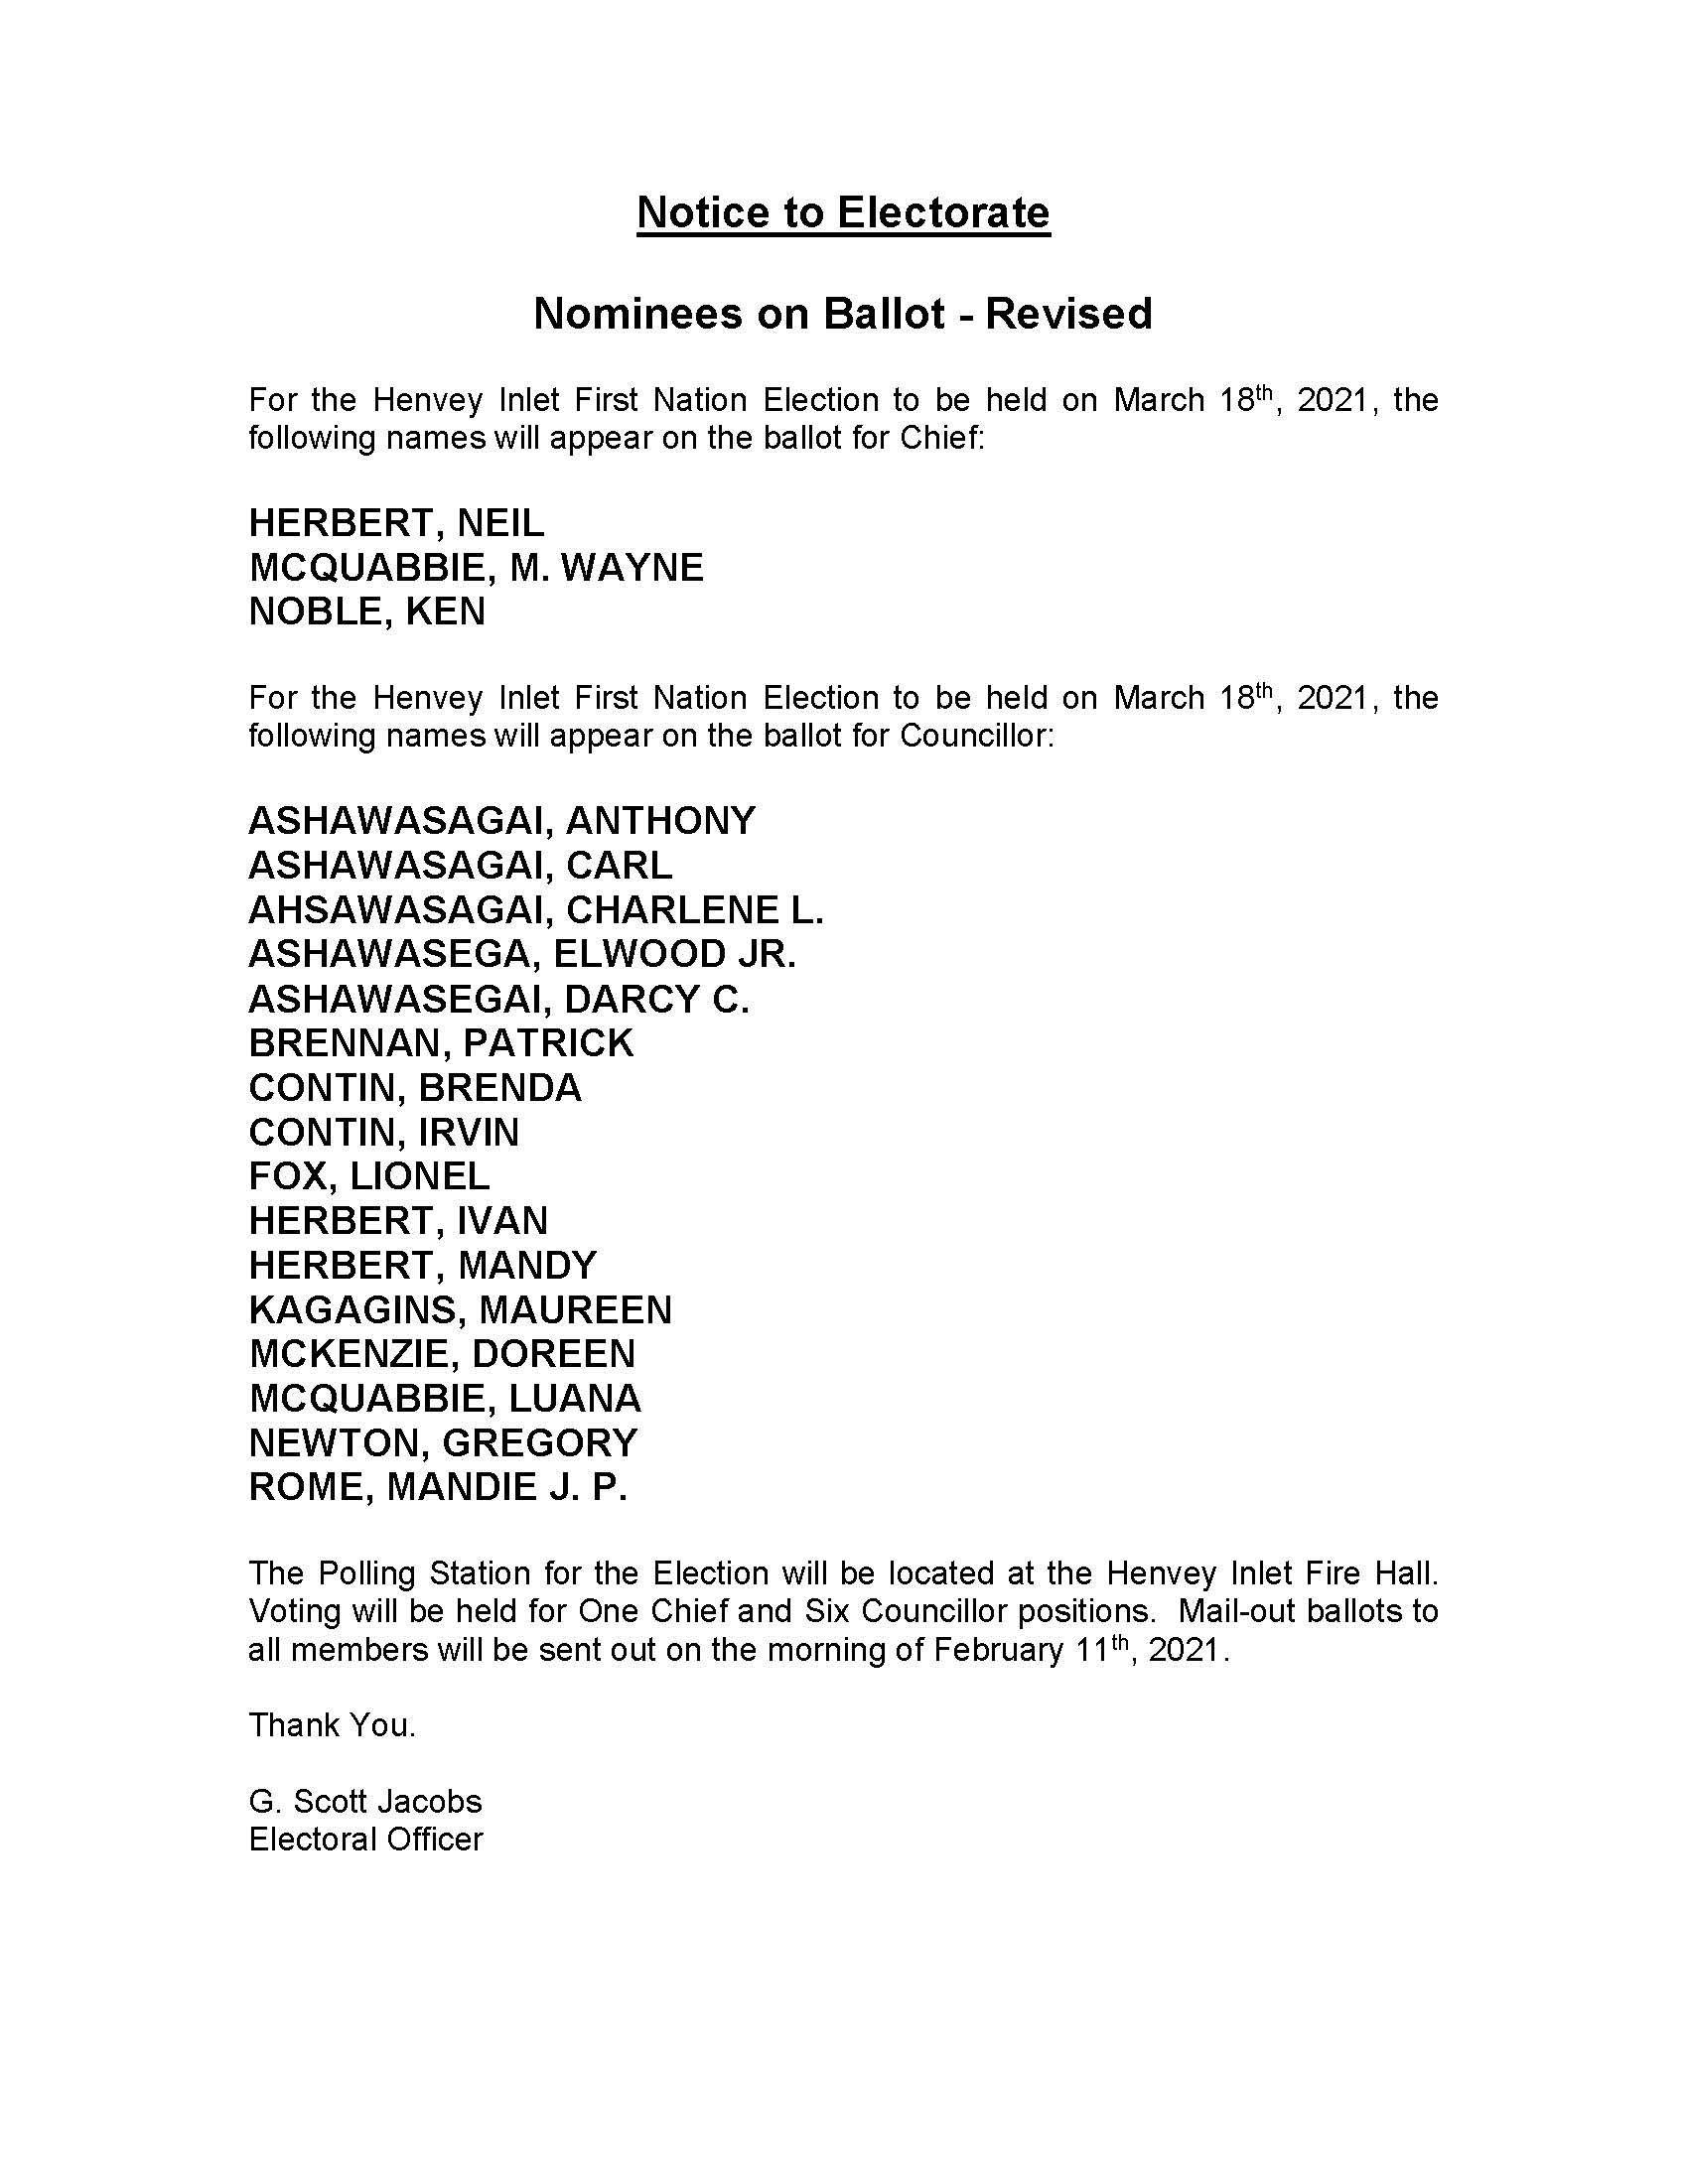 Posted Nominee Notice